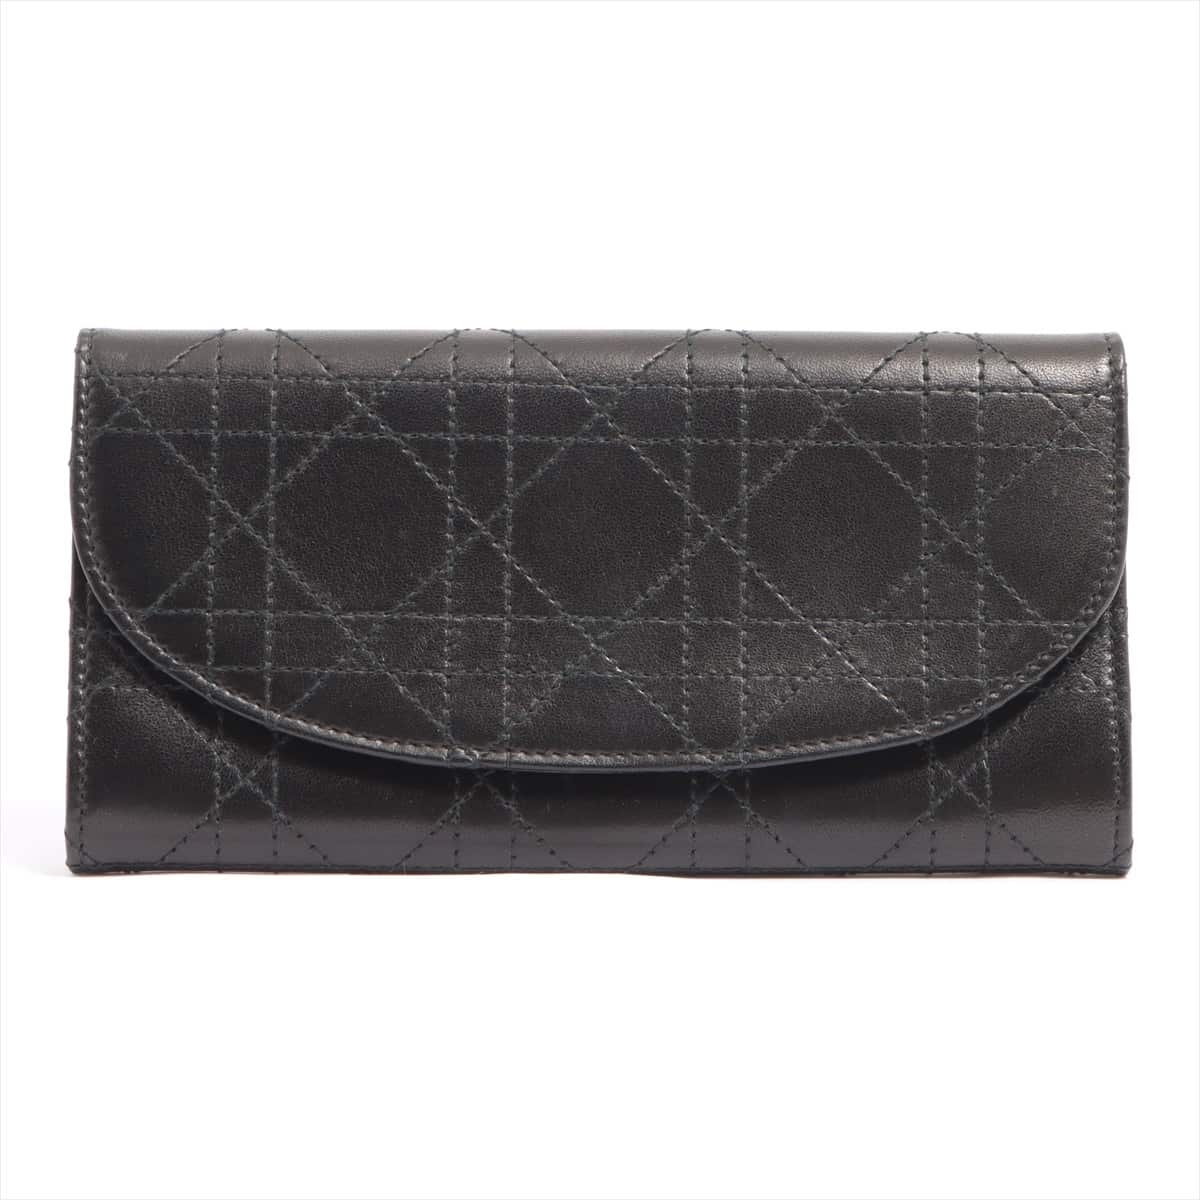 DIOR Lady Dior Cannage Leather Wallet Black